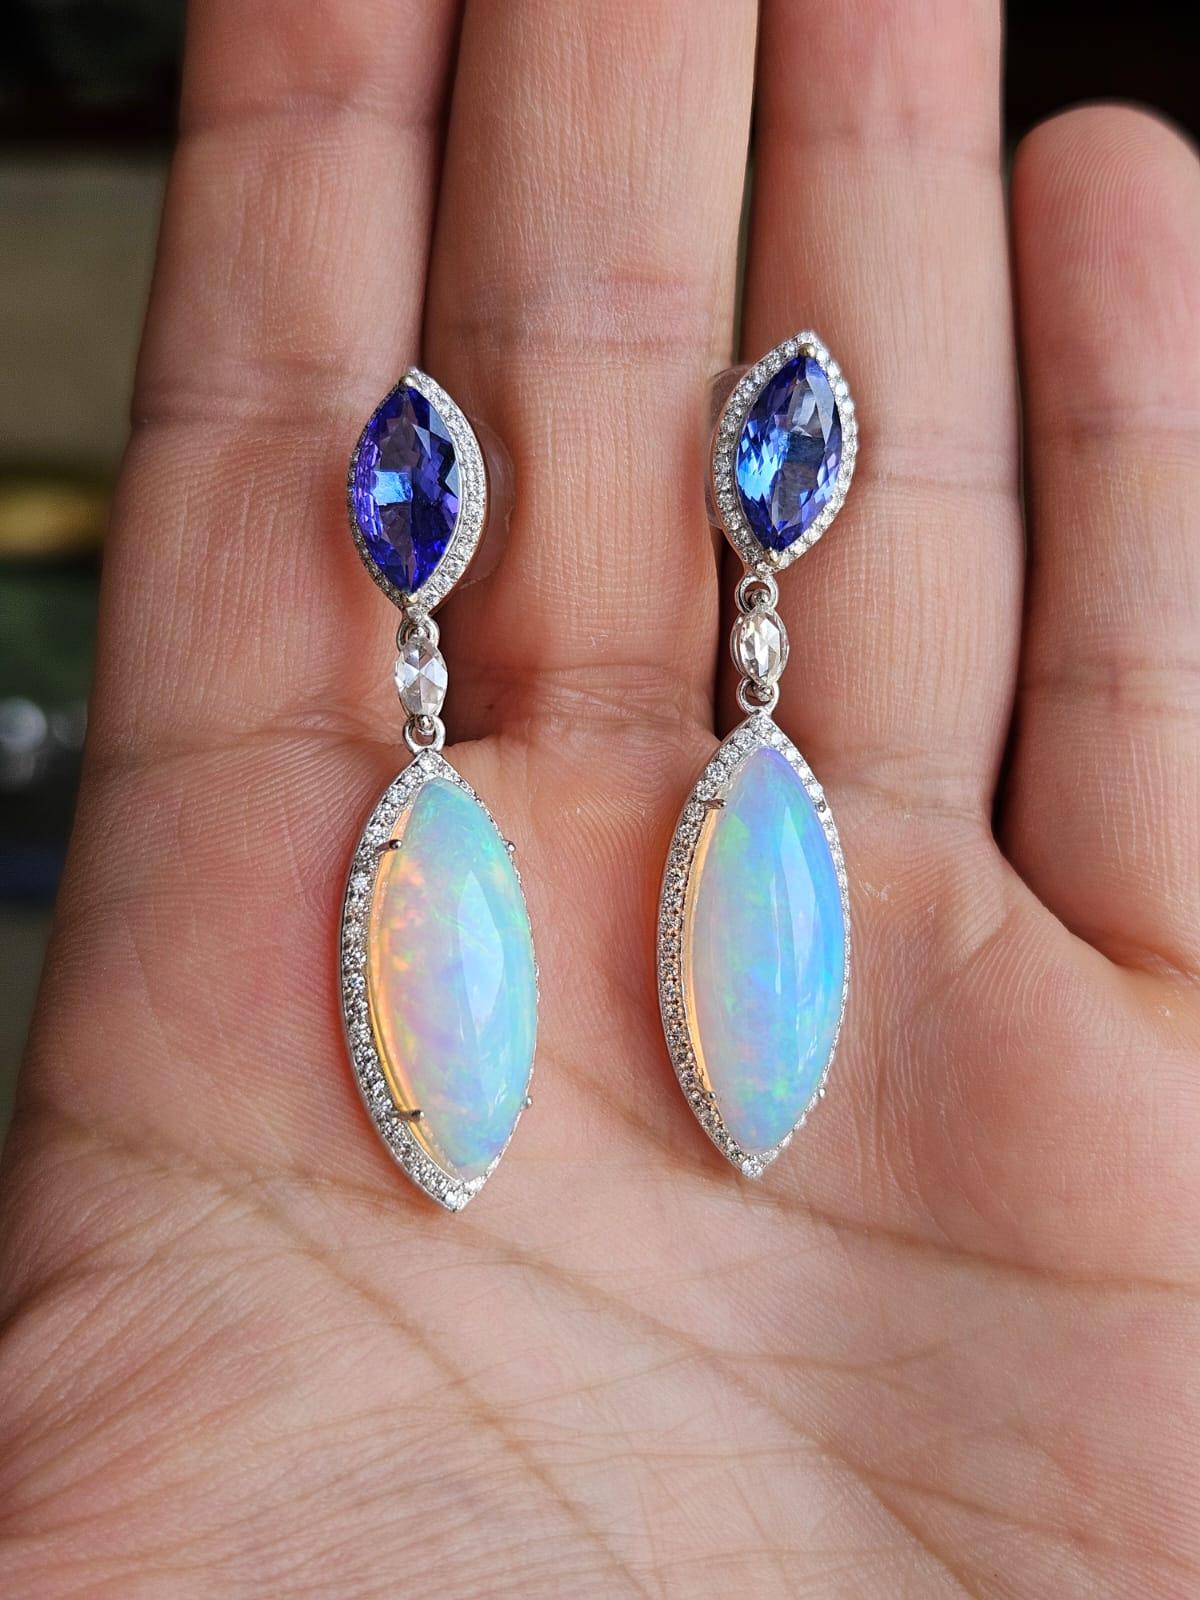 A very gorgeous and beautiful, modern style, Tanzanite & Opal Chandelier Earrings set in 18K White Gold & Diamonds. The weight of the Tanzanites is 2.82 carats. The marquise shaped Tanzanites are responsibly sourced from Tanzania. The weight of the